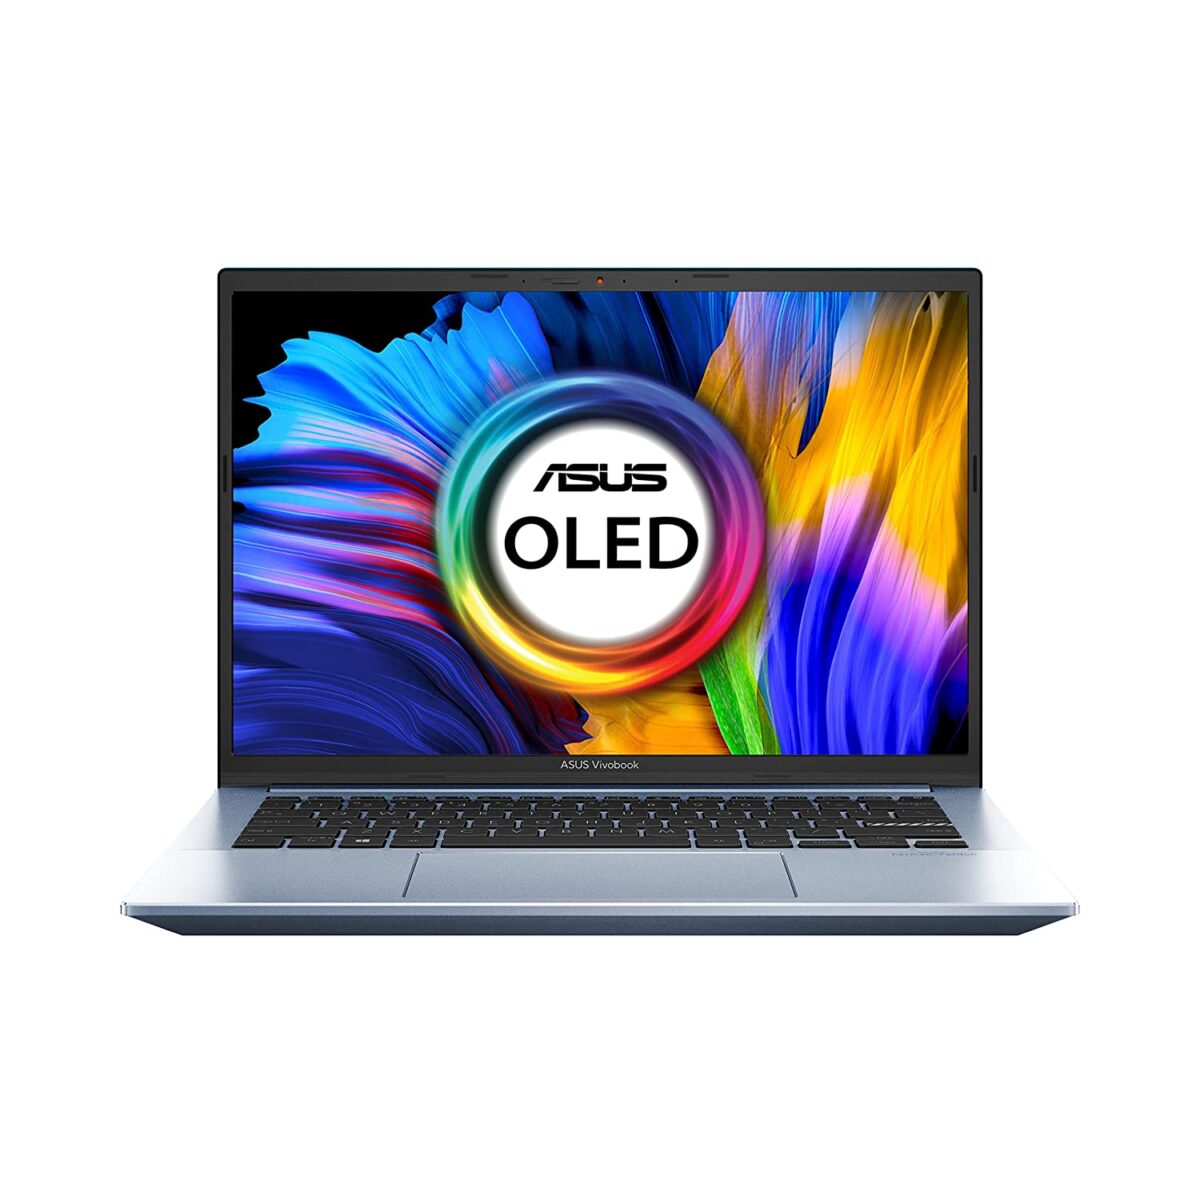 ASUS Vivobook Pro 14 OLED M3400QA-KM702WS ( AMD Ryzen 7 5800H / 16GB ram / 512GB SSD ) launched in India